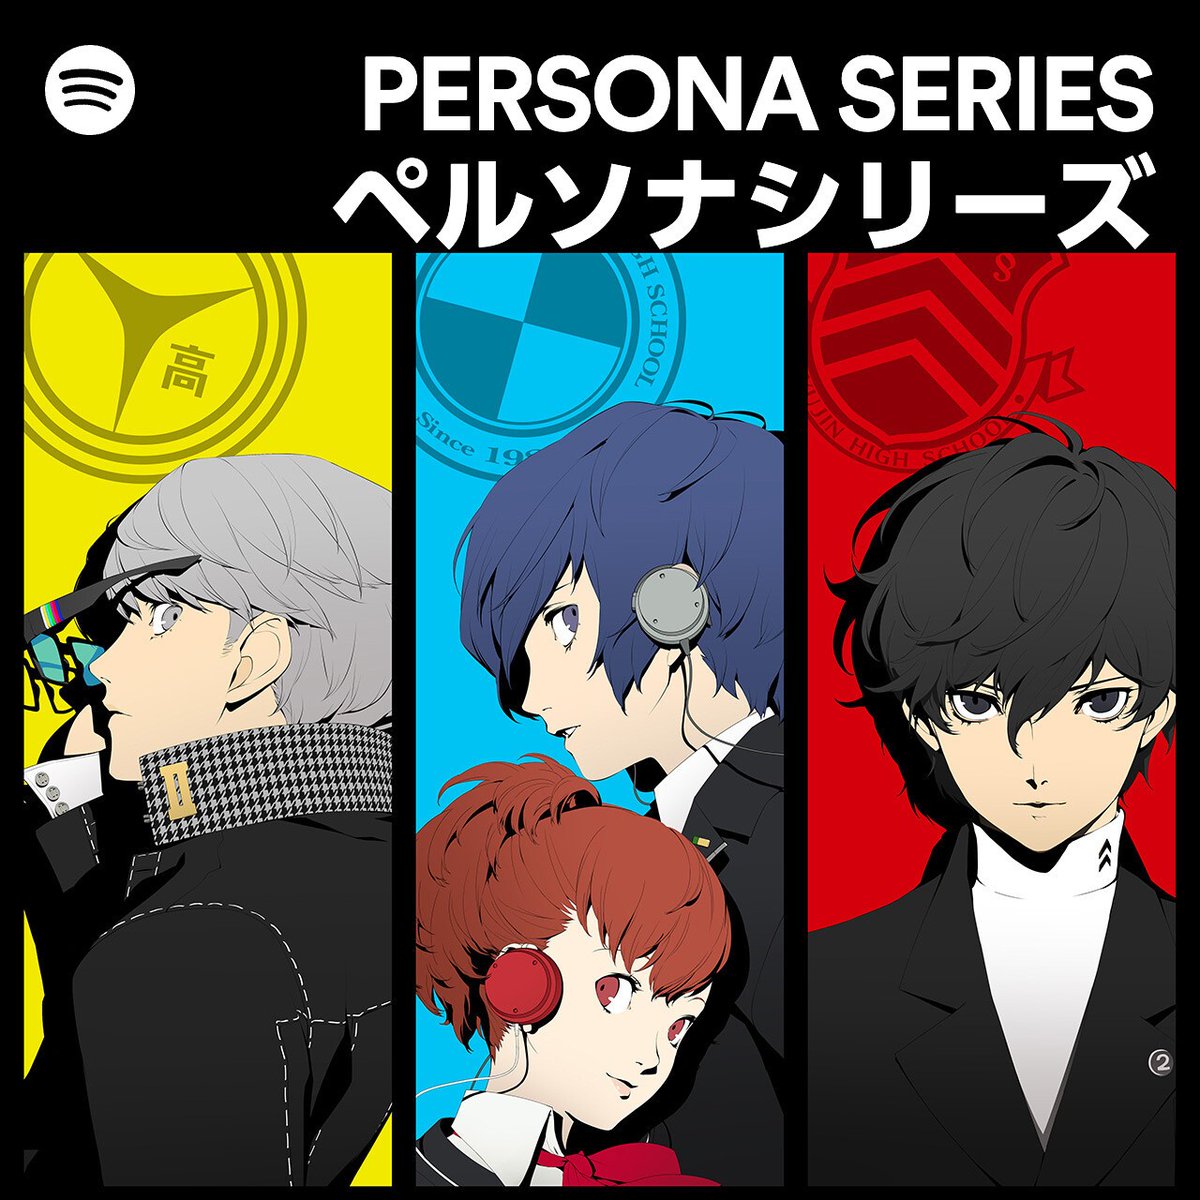 We’ve got one “Last Surprise” for you… 👀🎤🎶 Immerse yourself into the world of #Persona with the official @Spotify Persona playlist, including songs from the Persona 3 Reload soundtrack, available now! ➡️ atlus.link/Persona-Series…